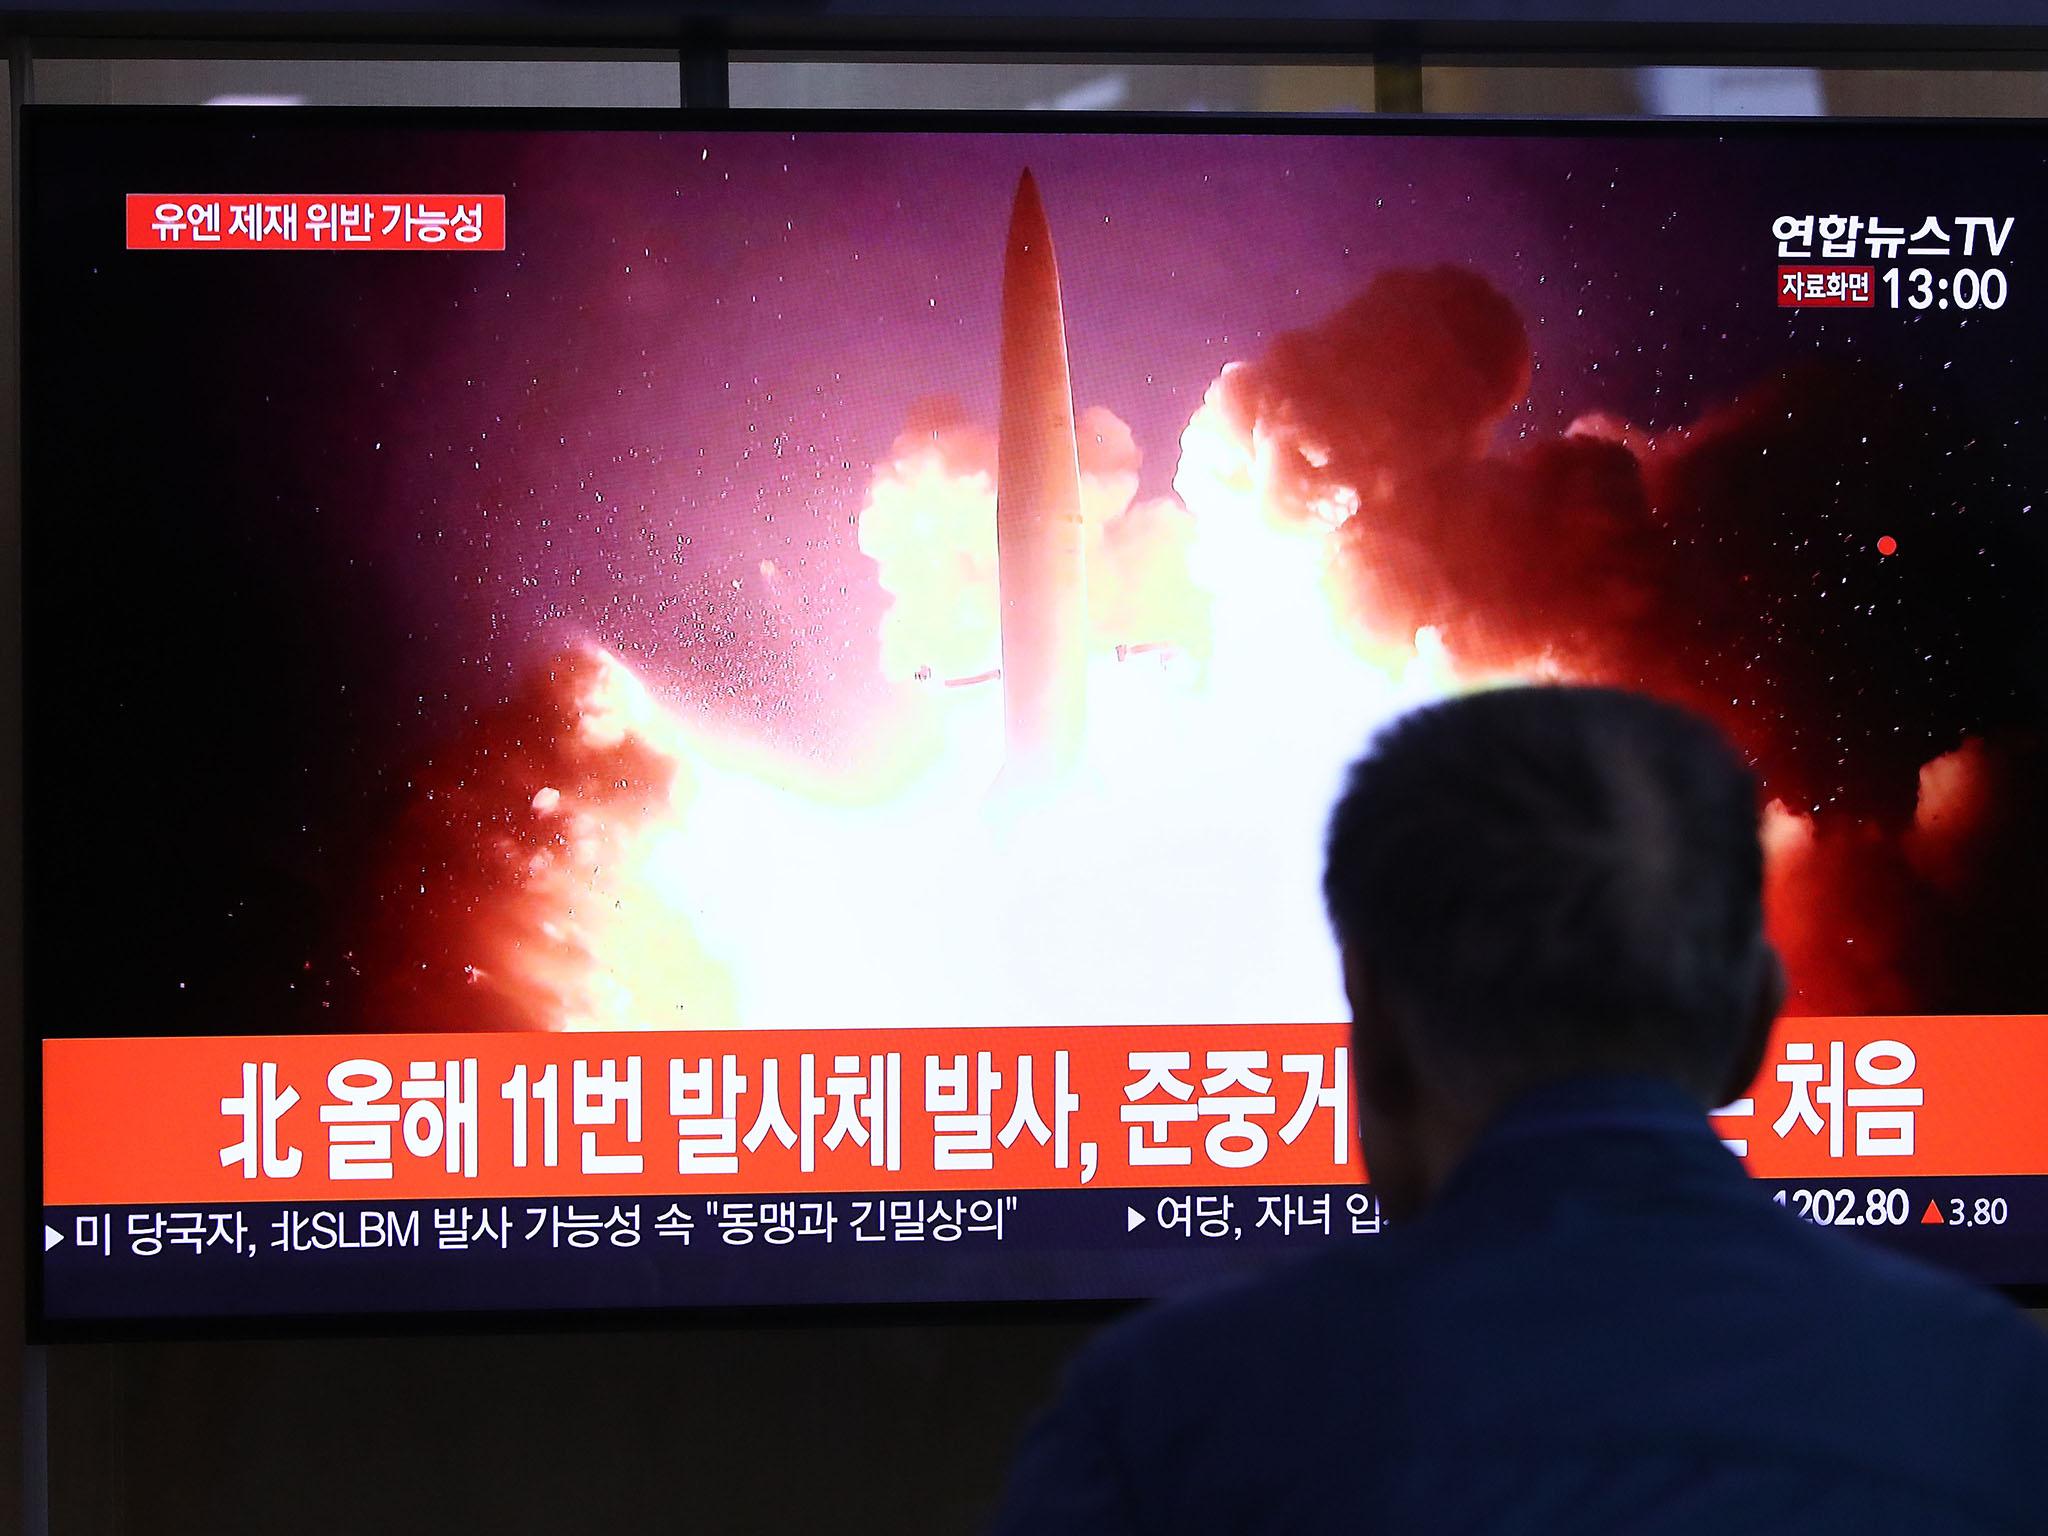 North Korea has tested missiles as recently as October